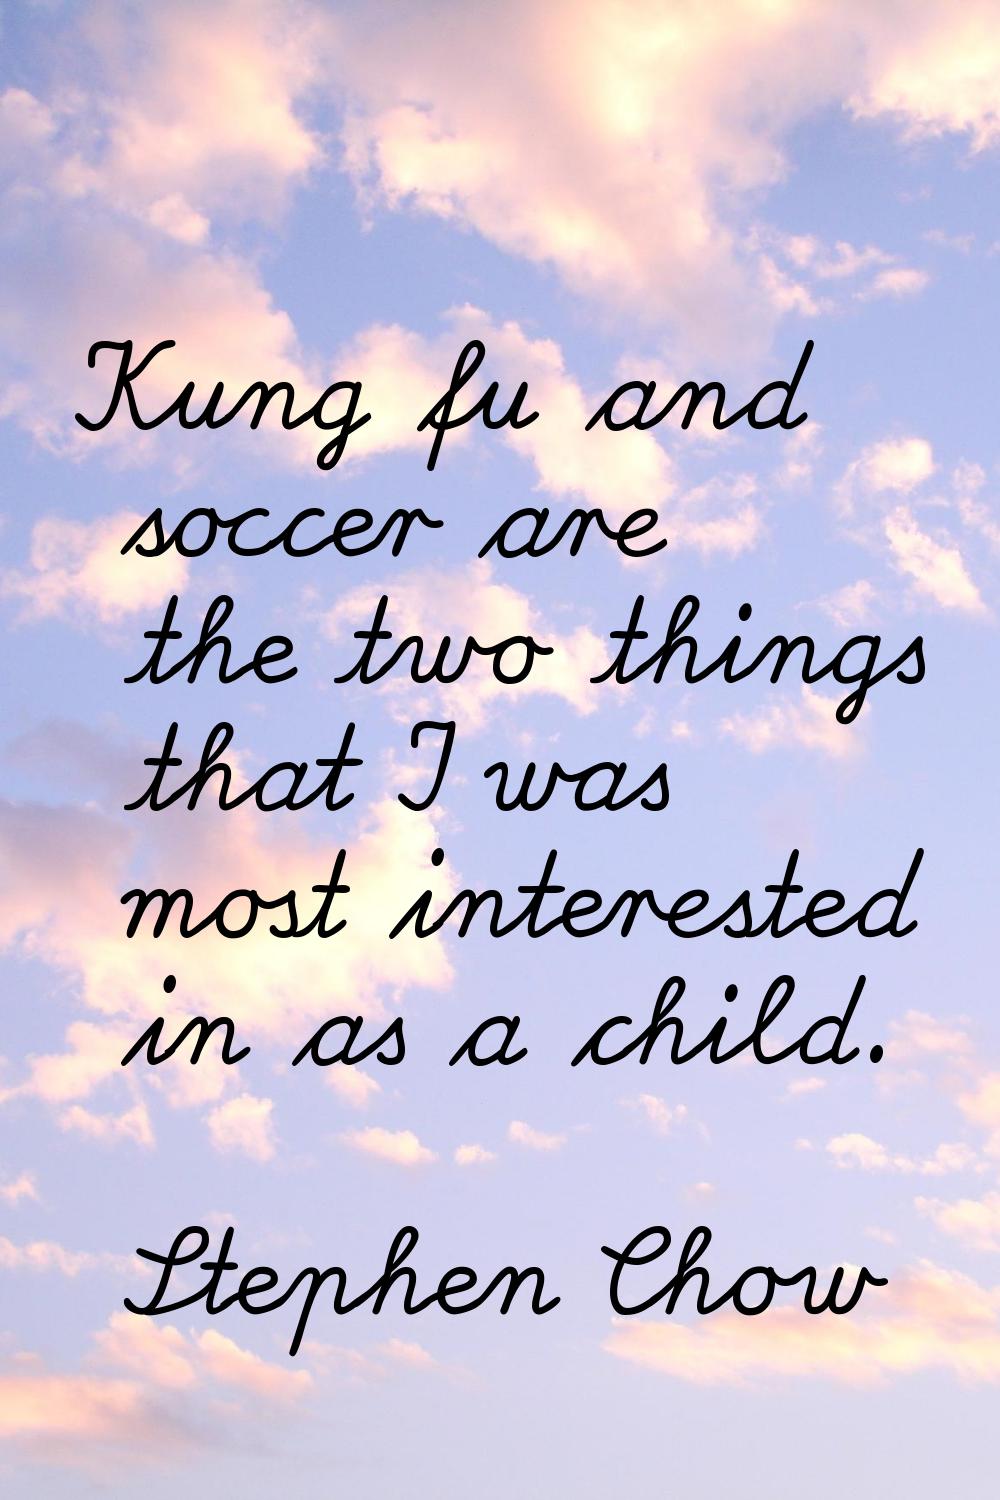 Kung fu and soccer are the two things that I was most interested in as a child.